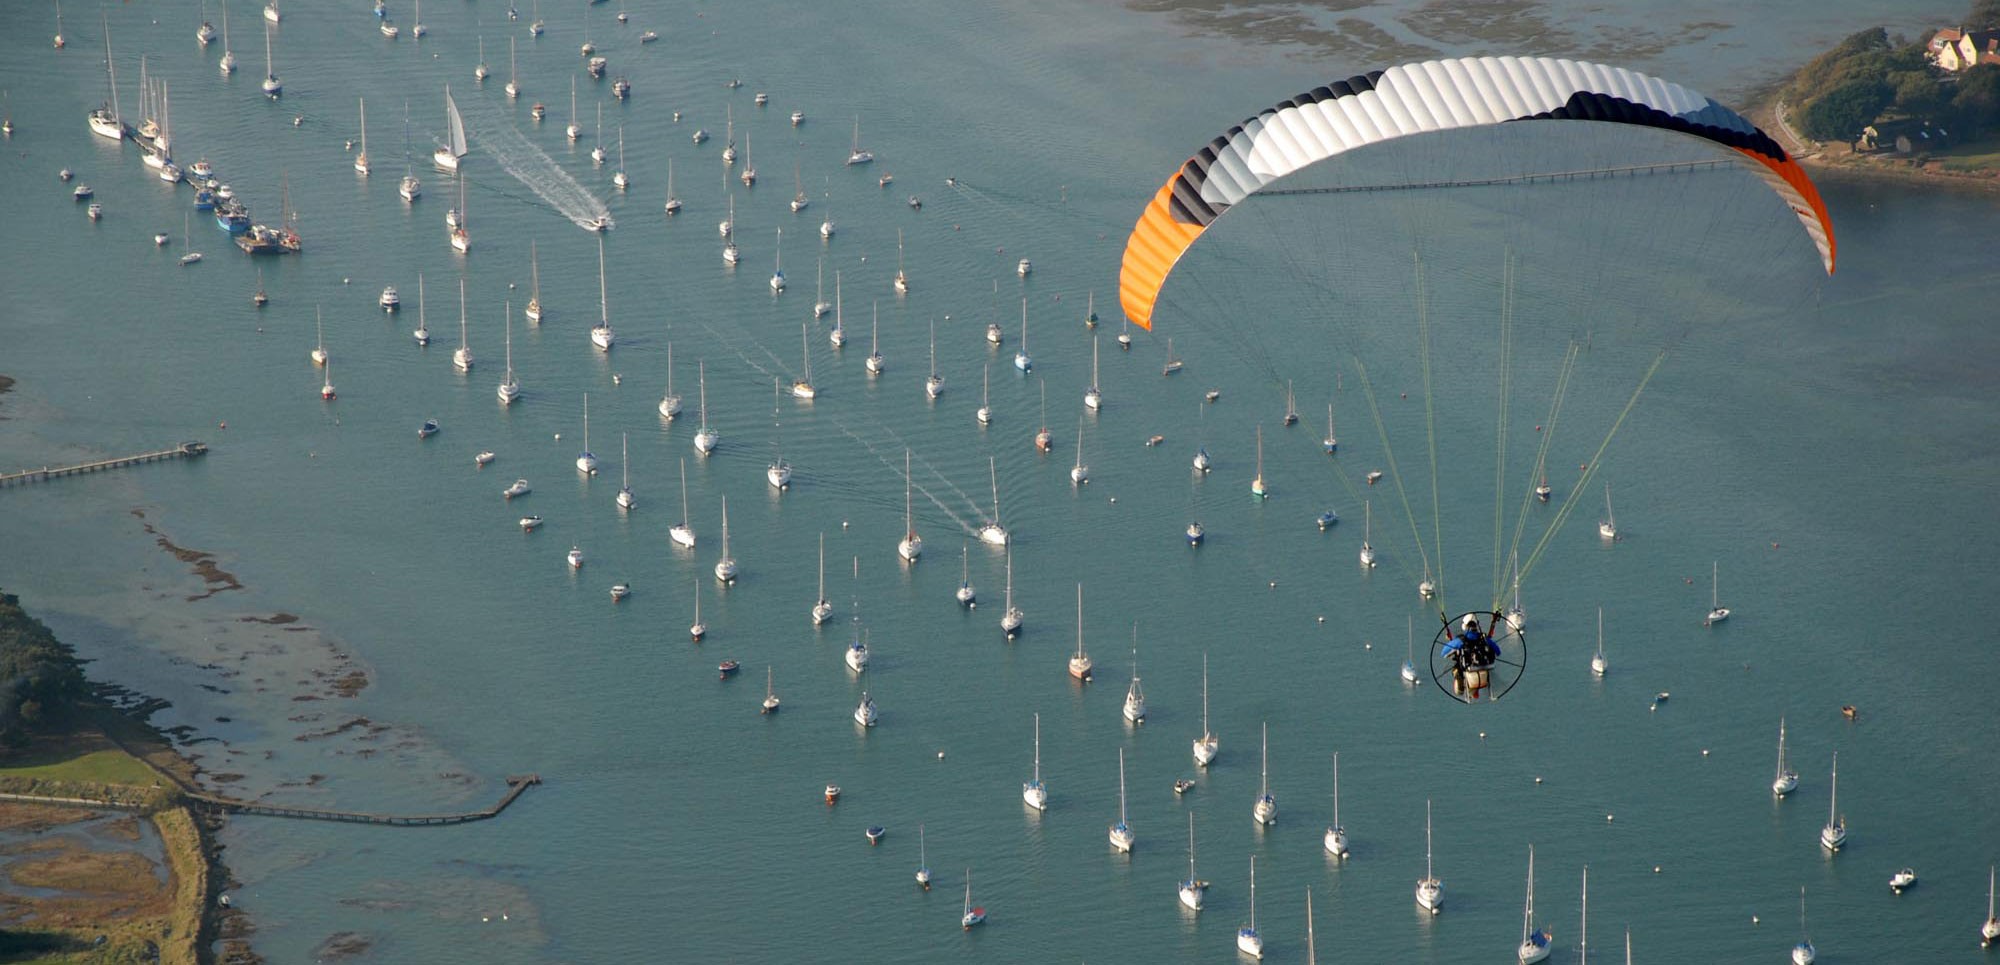 Ben flying over the Estuary at Chichester